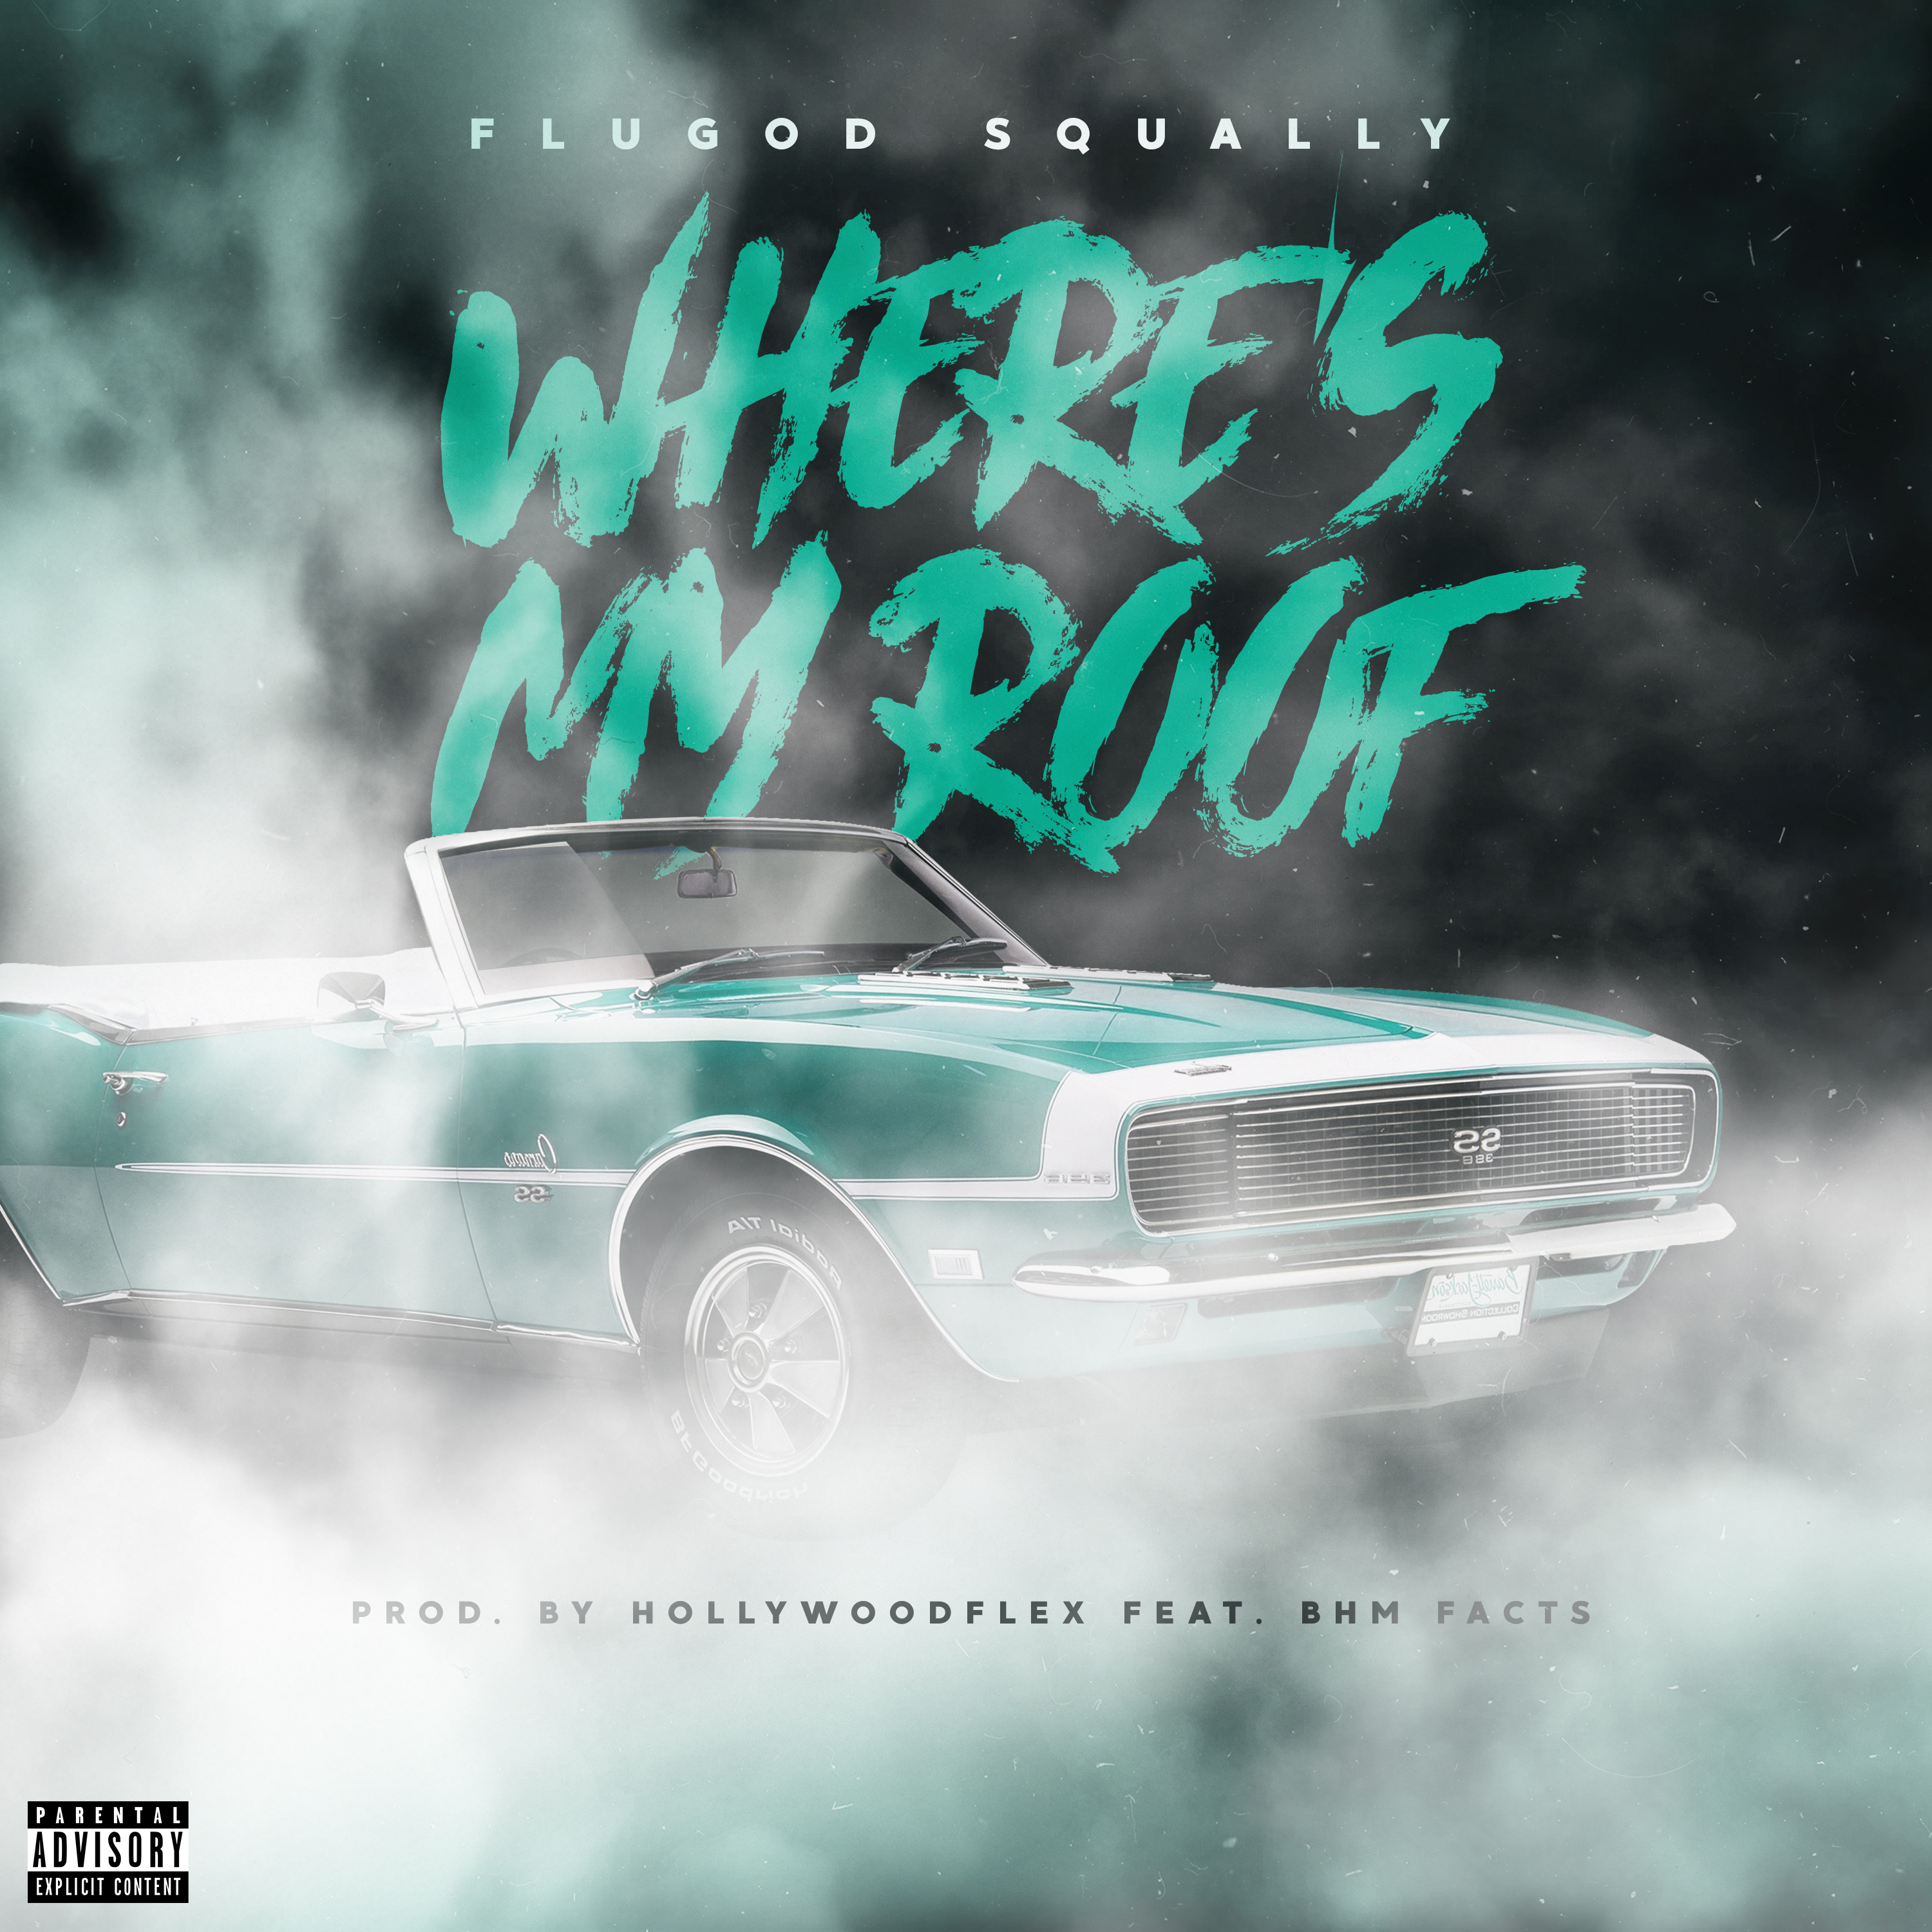 Flugod Squally brings a new definition to turn up with new single “Where My Roof” @FluGodSqually